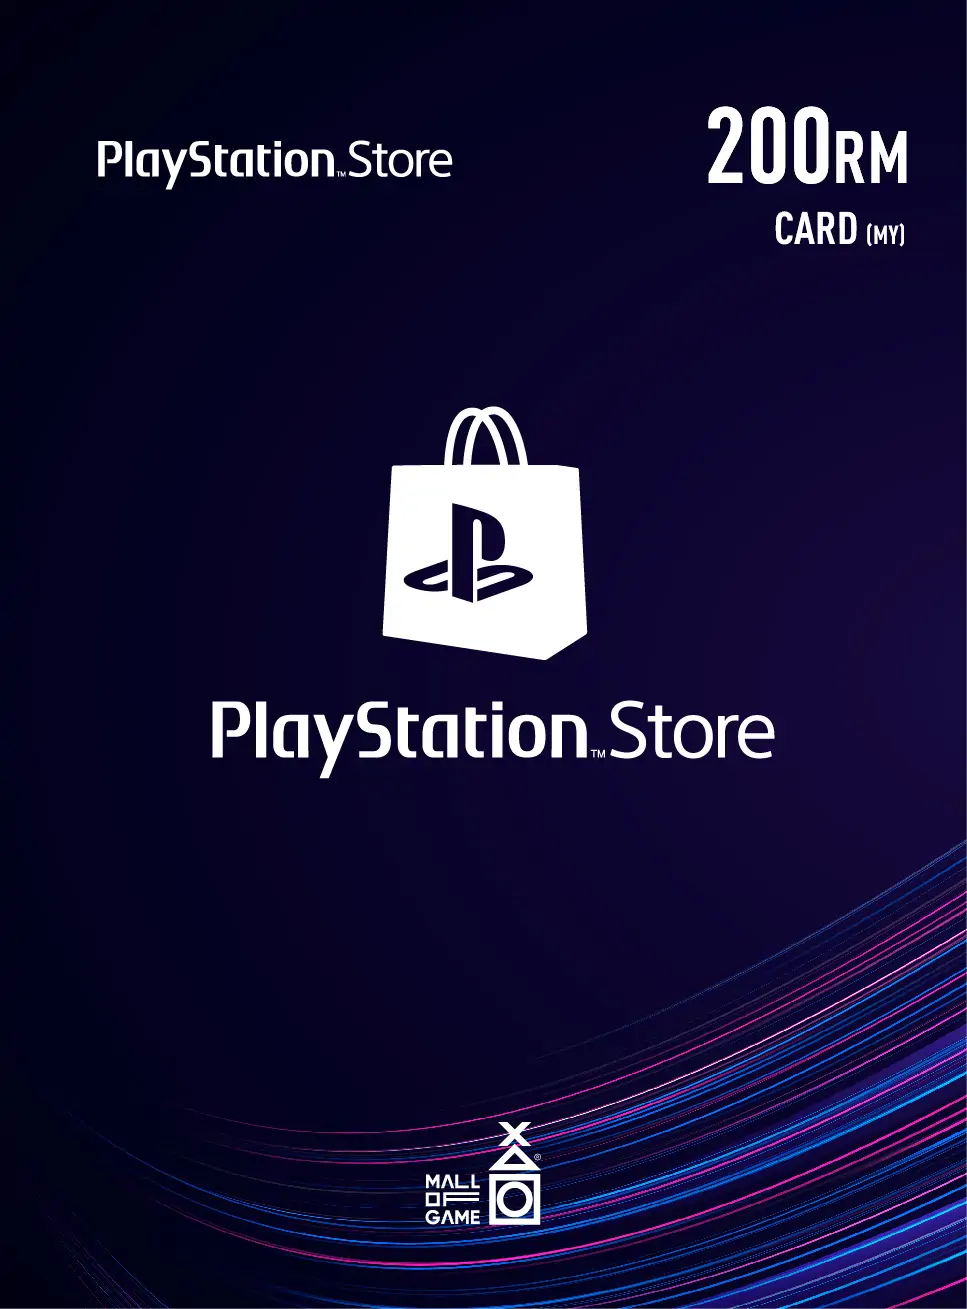 PlayStation™Store RM200 Cards (MY)